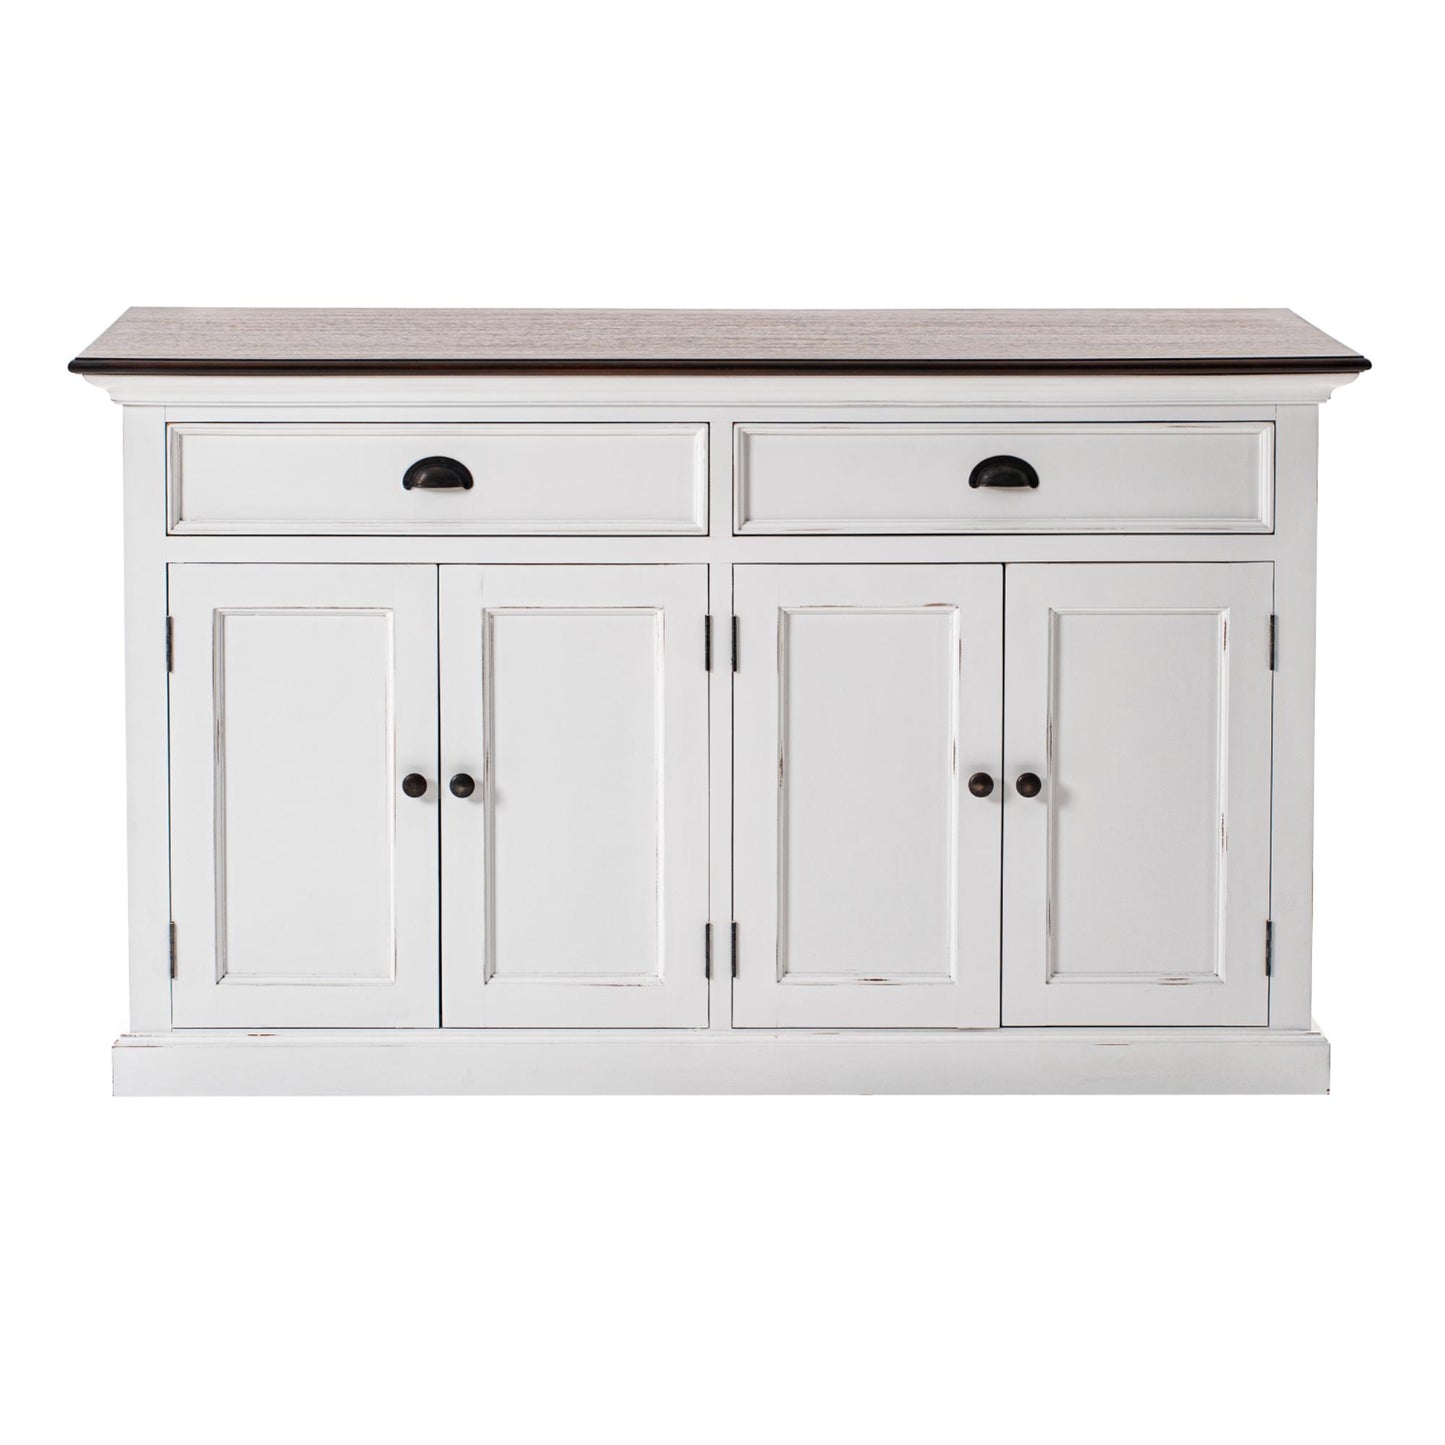 Halifax Accent collection by Nova Solo.  Classic Buffet CasaFenix